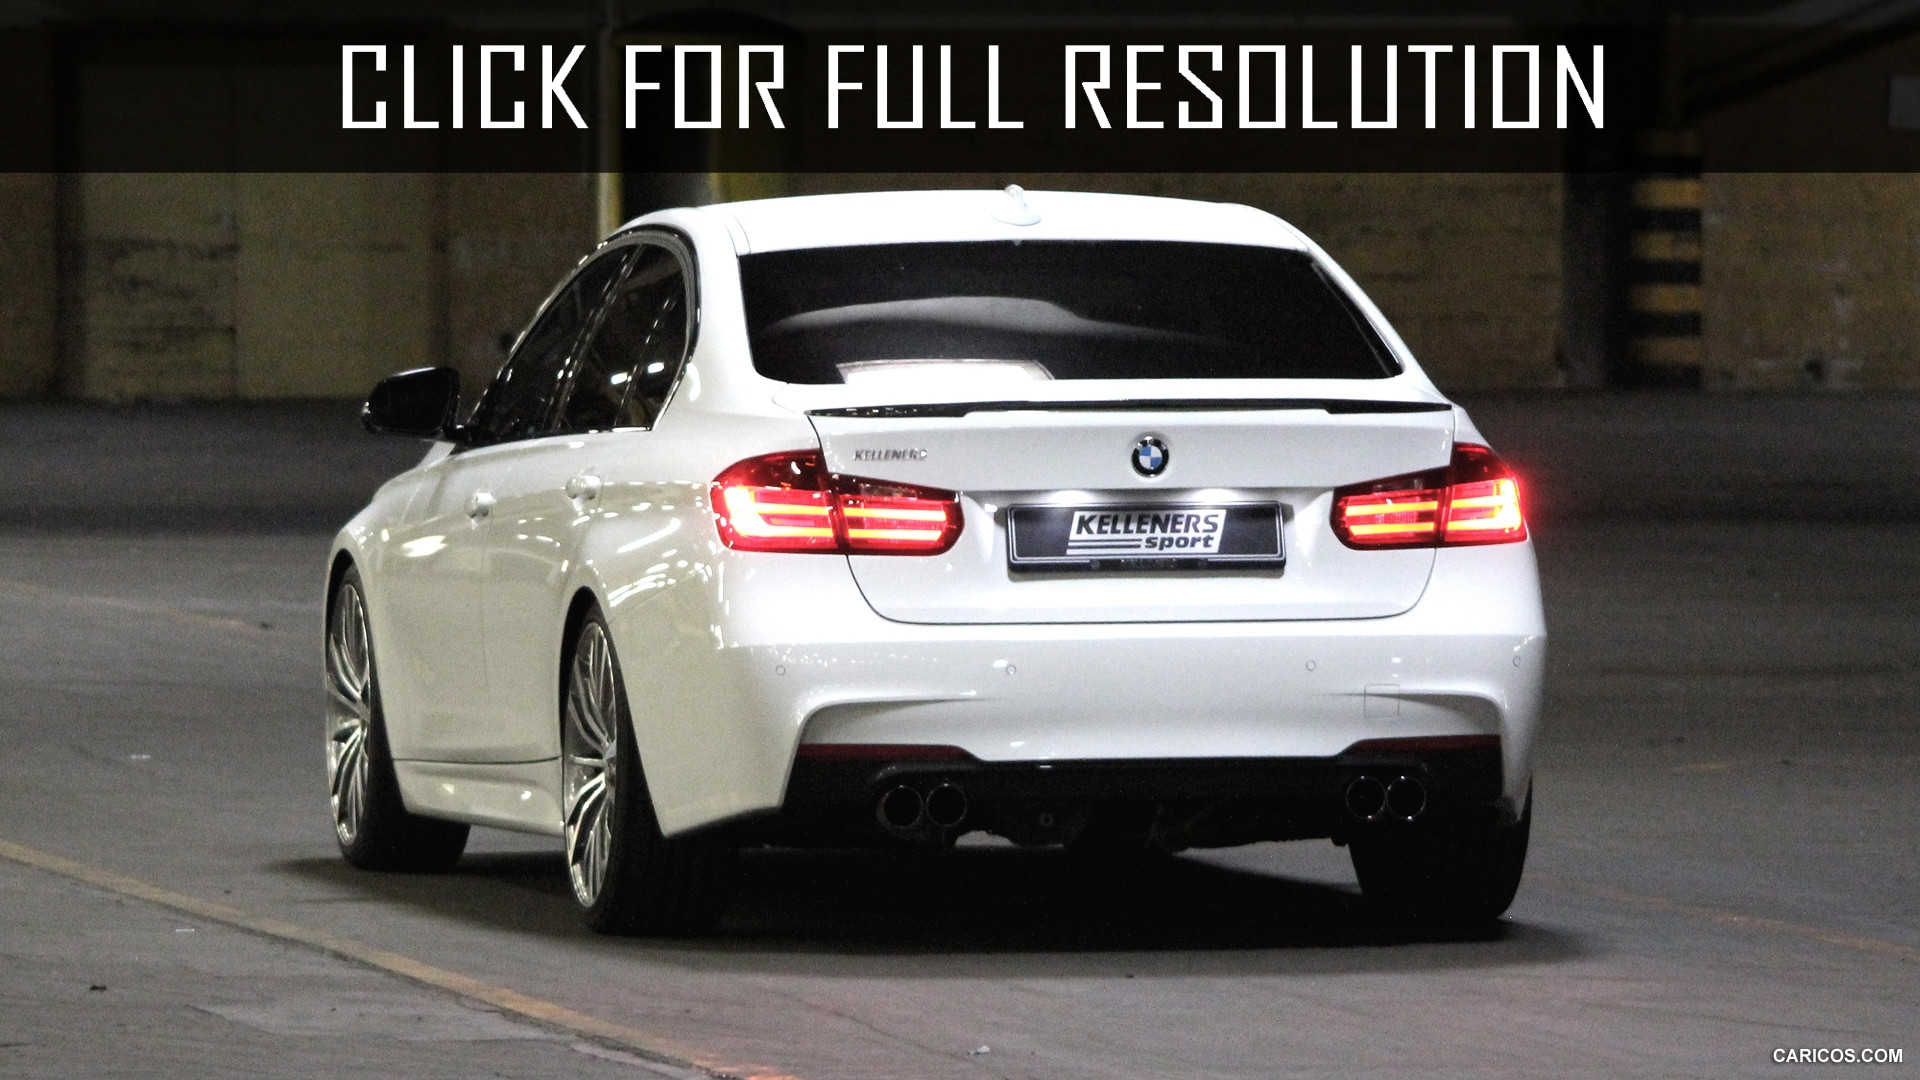 2014 Bmw 335i M Sport News Reviews Msrp Ratings With Amazing Images